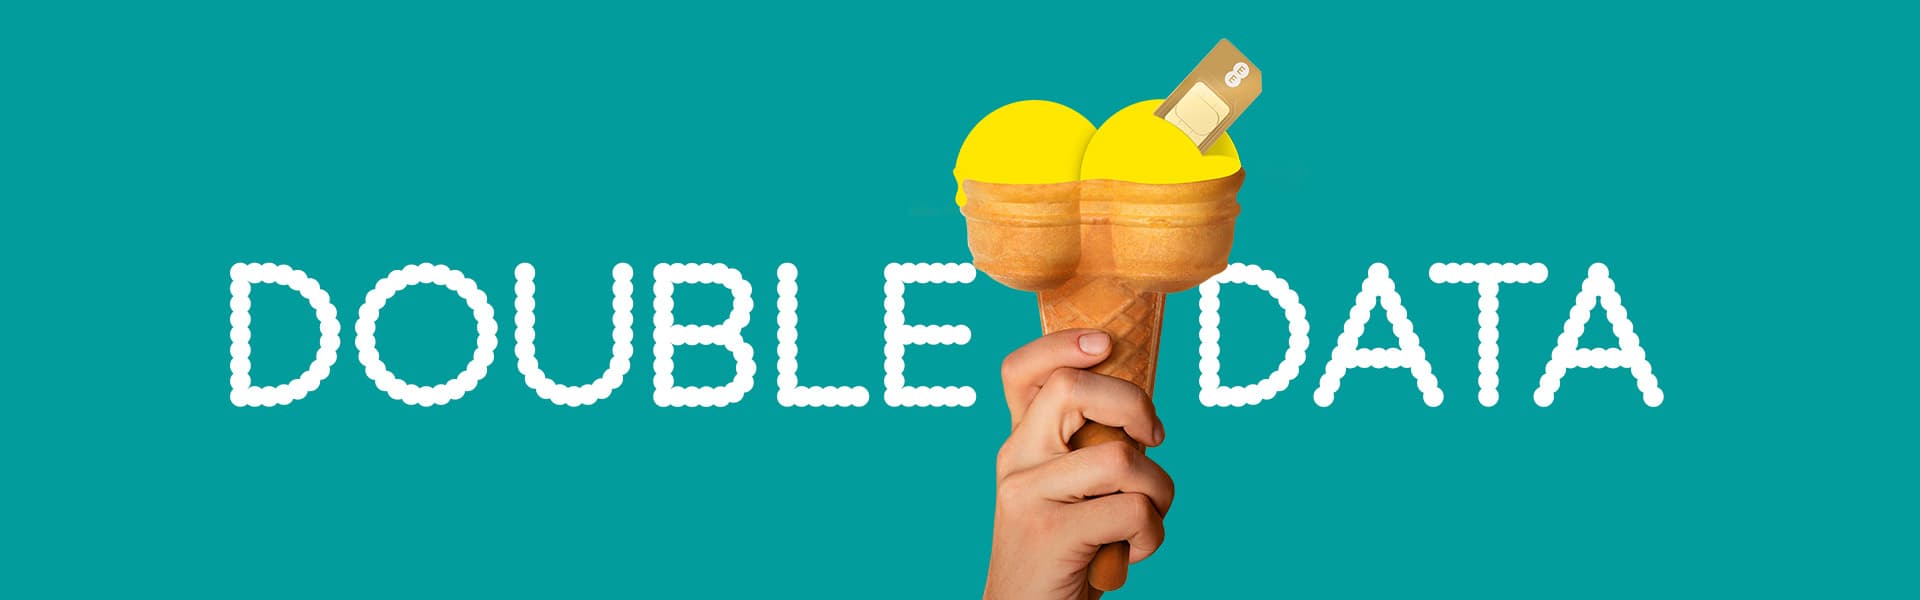 EE SIM card deals with double data